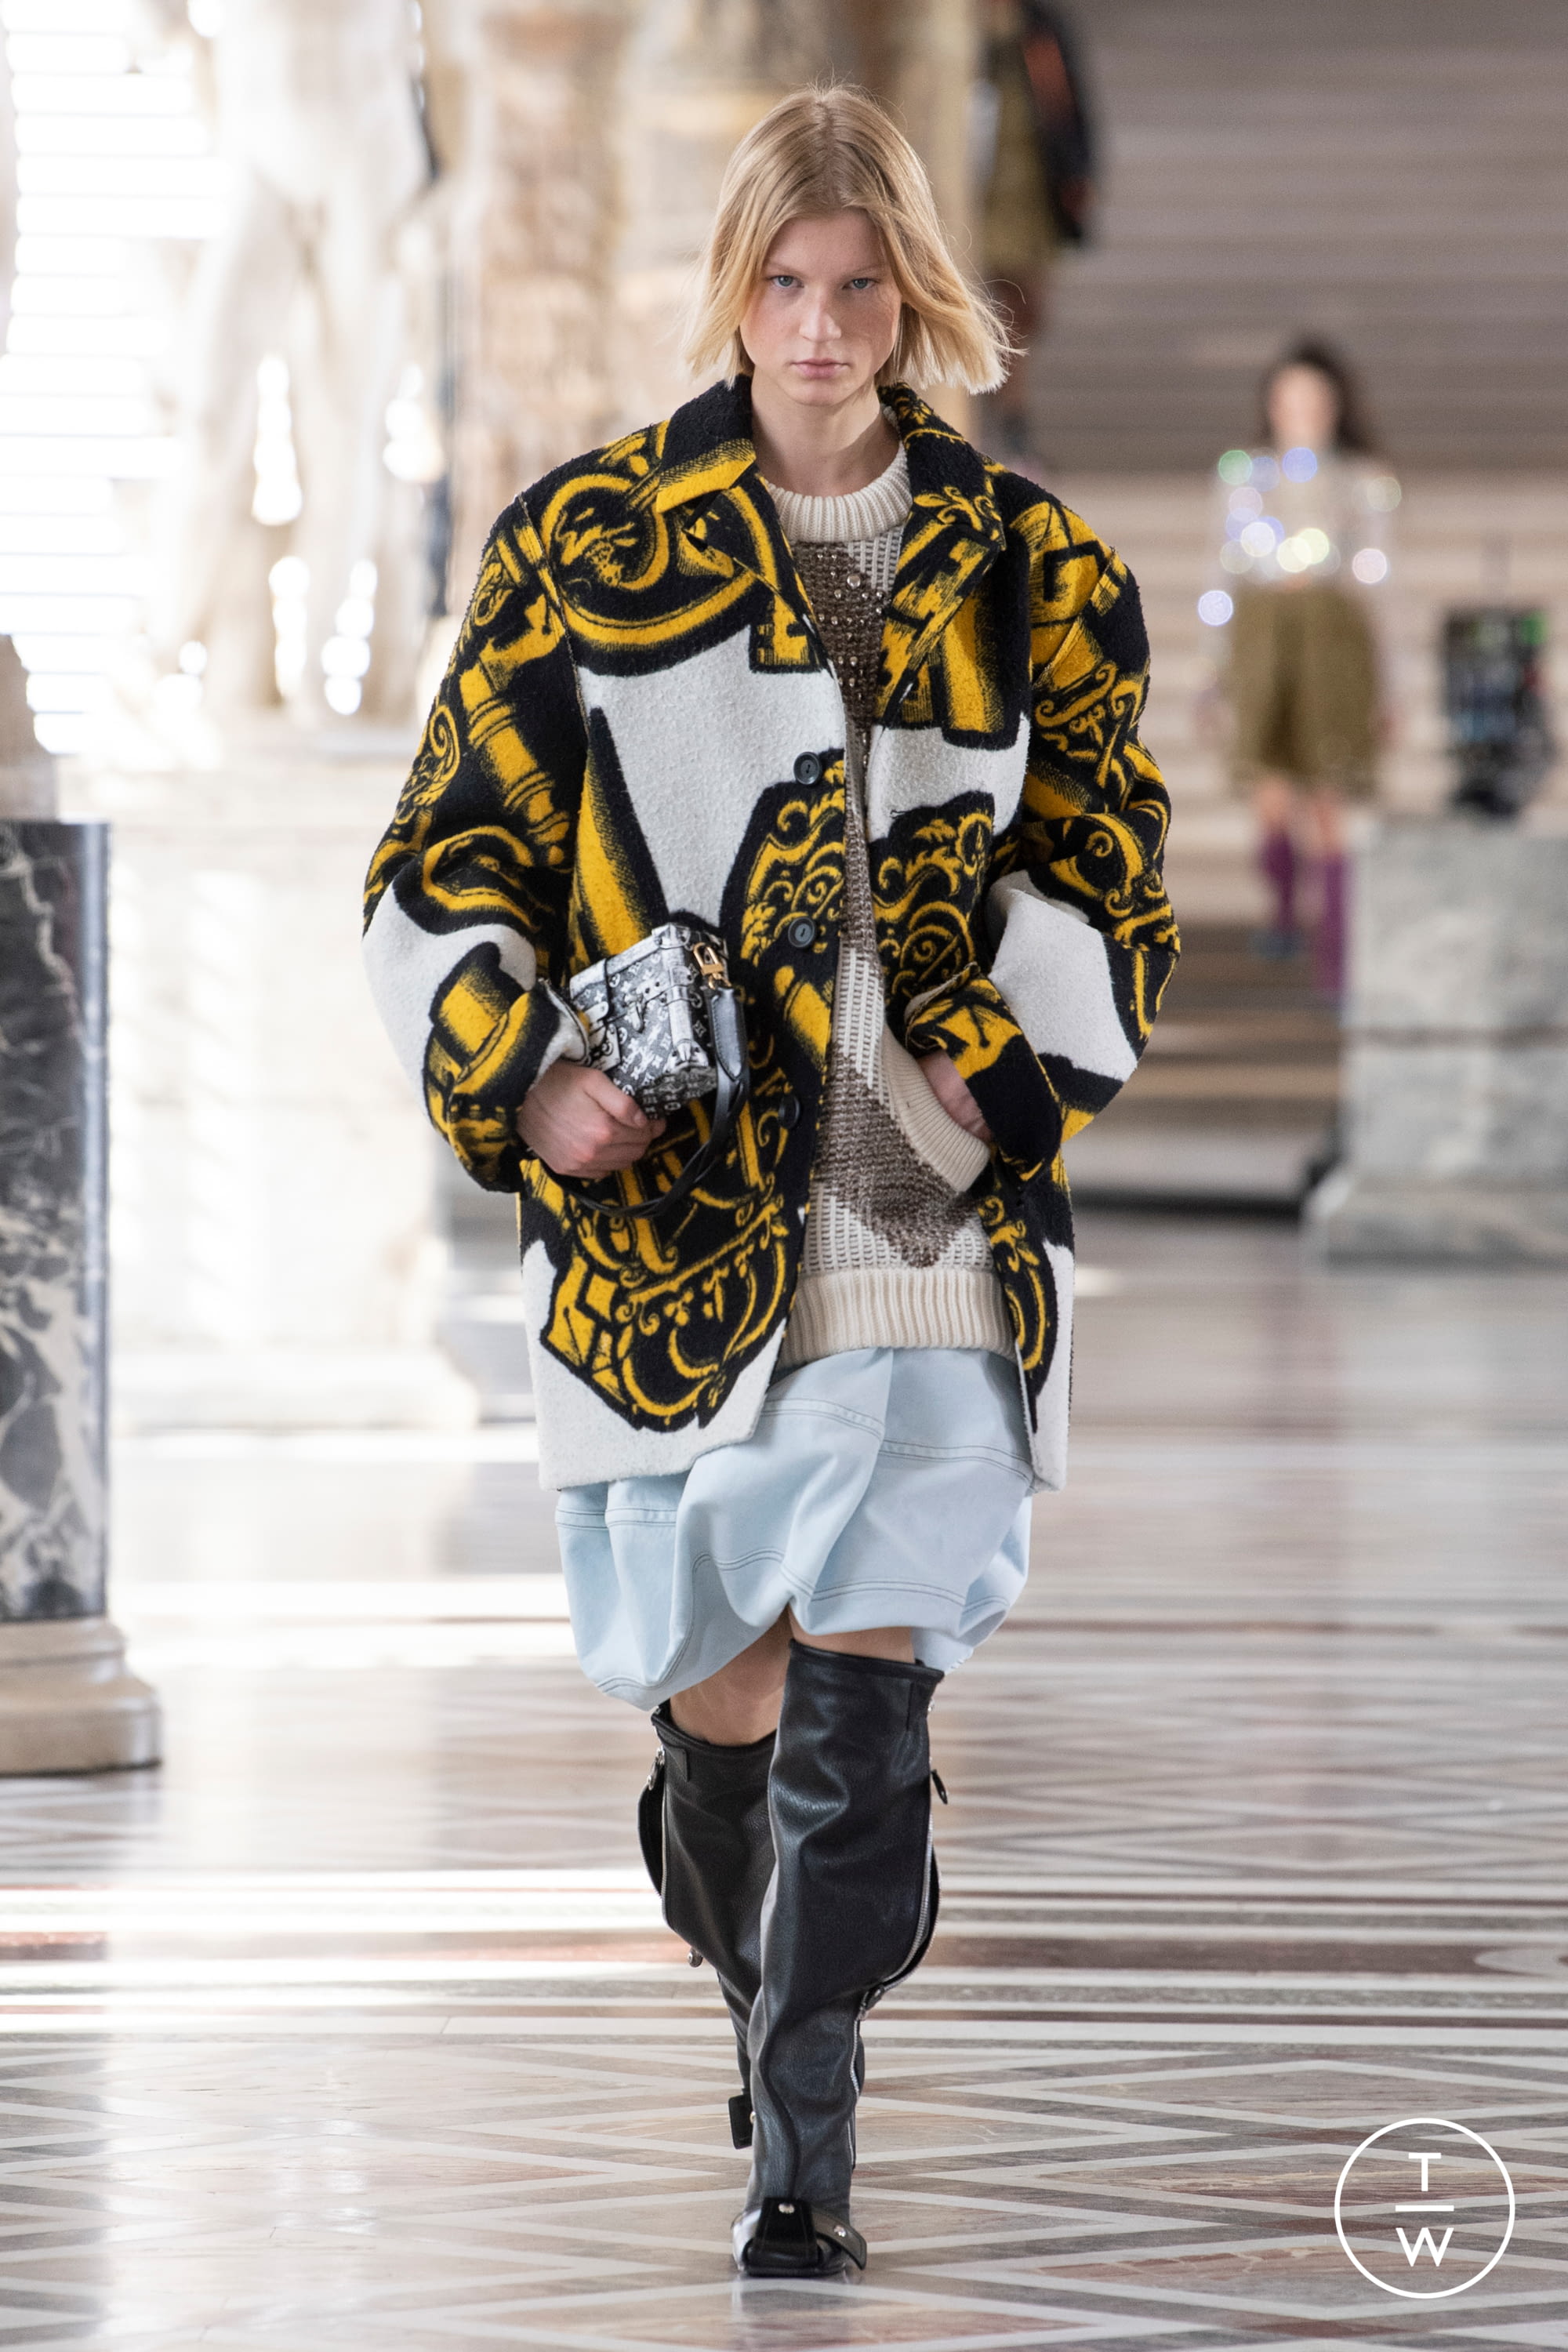 Five fresh styling tricks we learned from the Louis Vuitton AW21 show